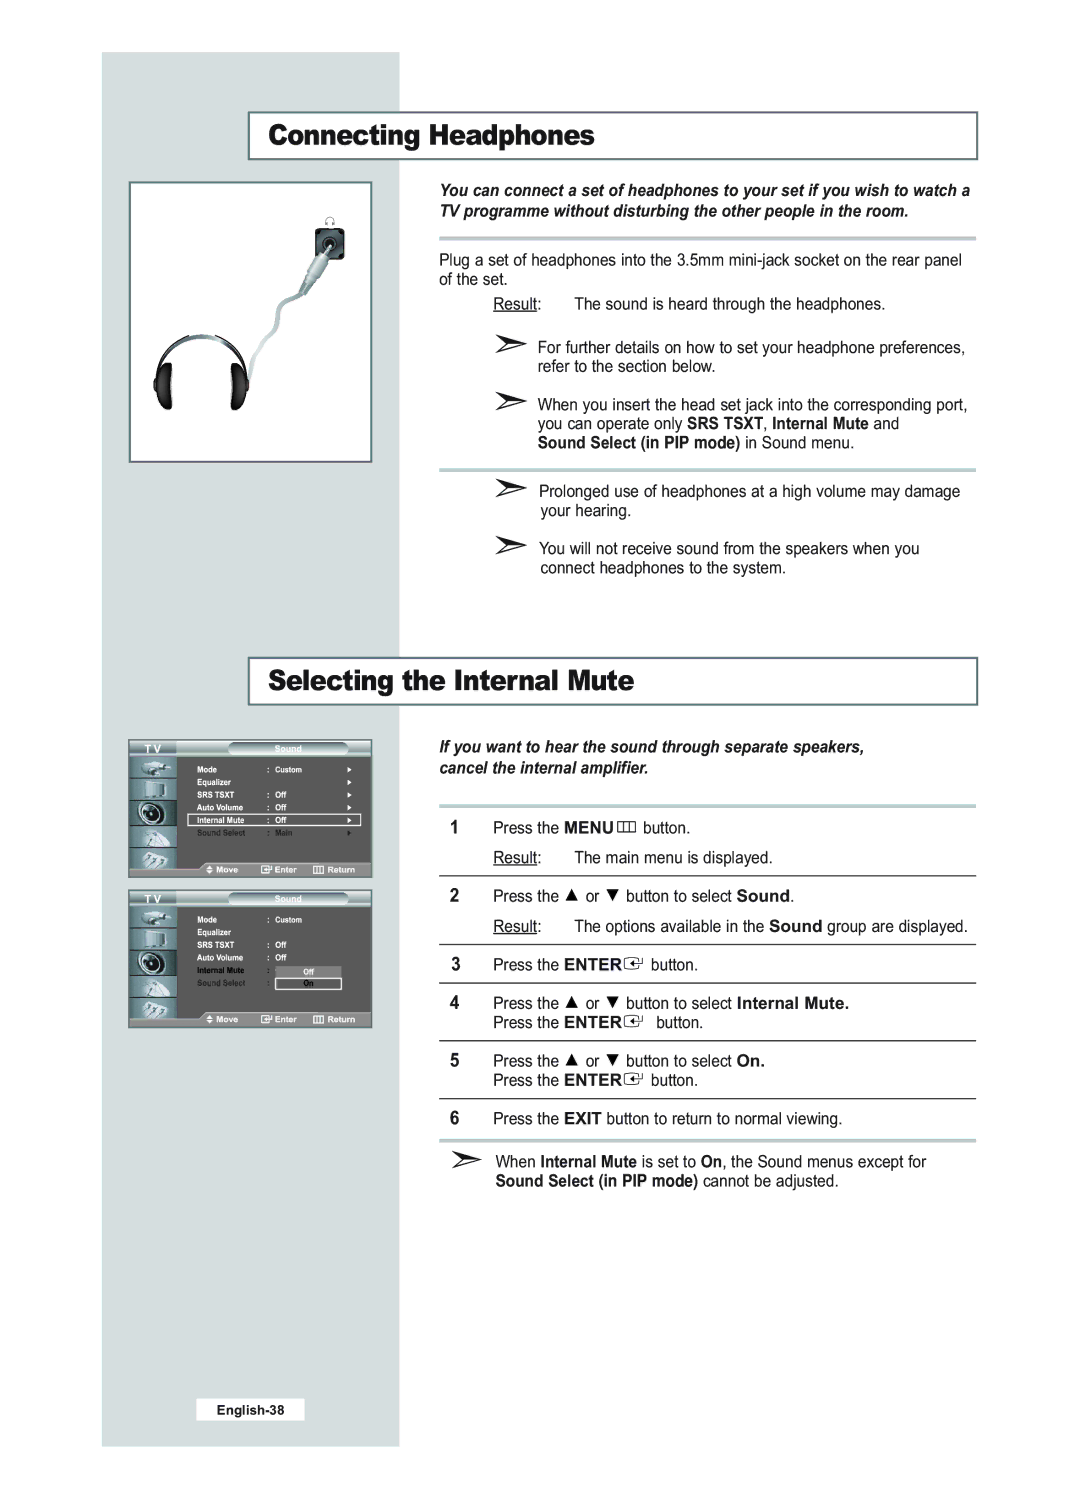 Samsung LE23R51B manual Connecting Headphones, Selecting the Internal Mute, Sound Select in PIP mode cannot be adjusted 